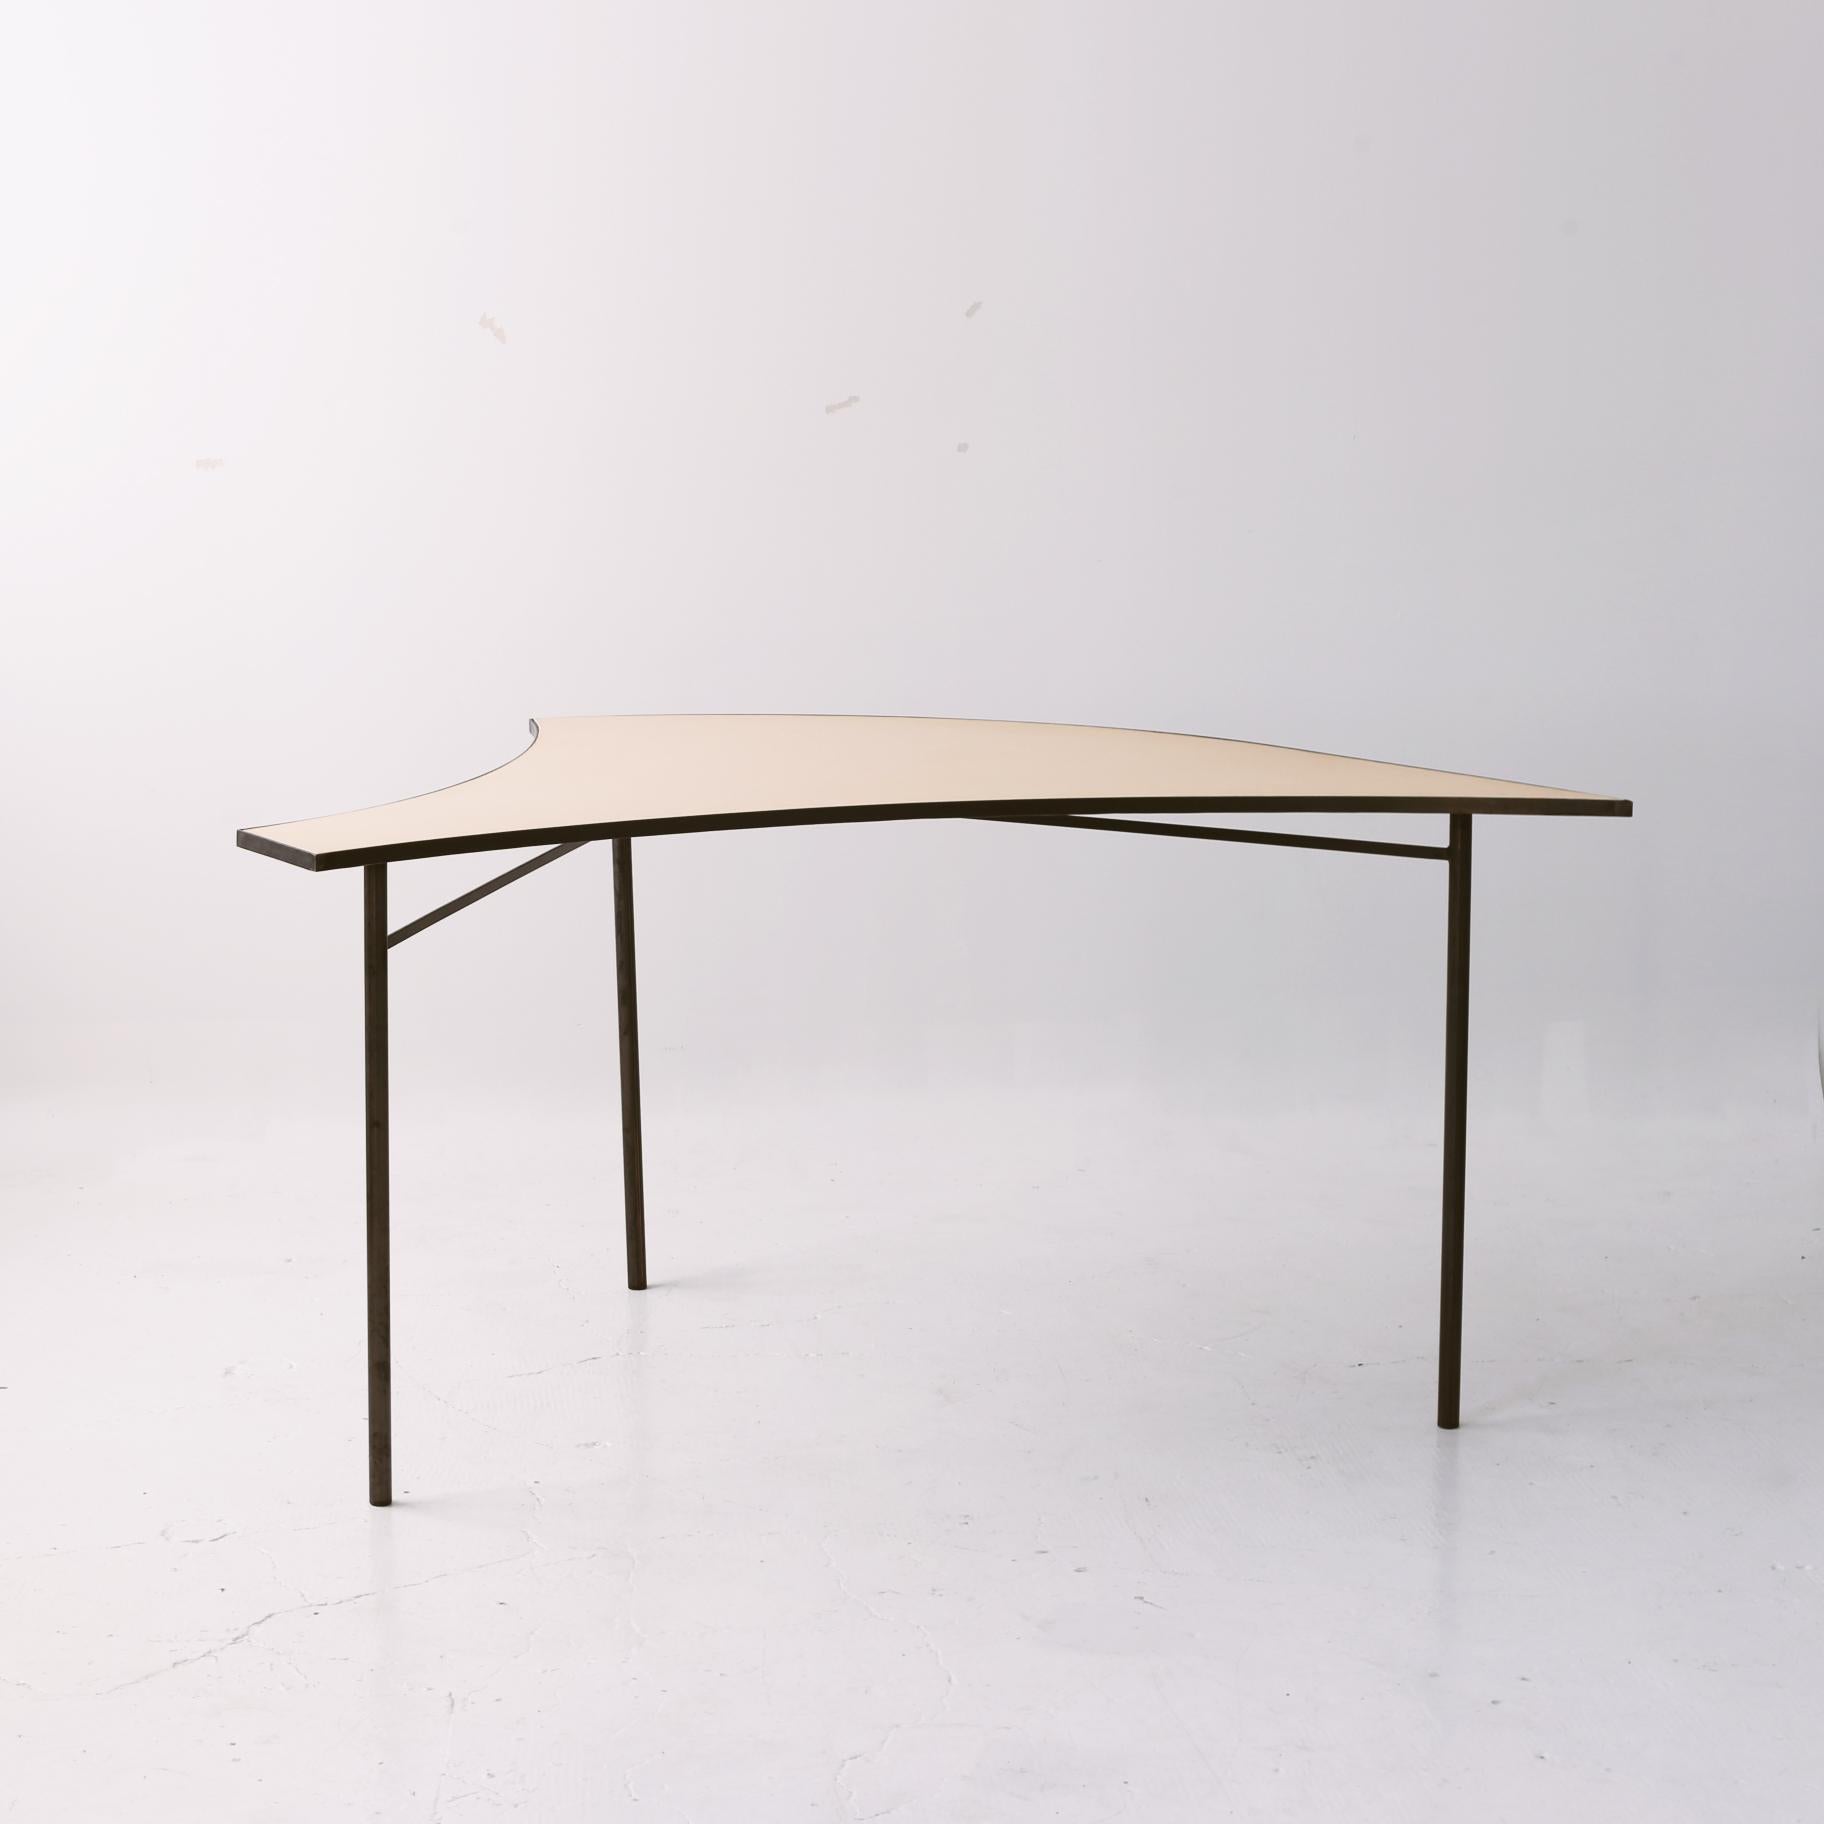 Piece D TABULA [non] RASA table by Studio Traccia
Dimensions: W 140 x D 152 x H 74 cm
Materials: Steel.
Different combinations are available.

The table was designed for our installation called tabula[non]rasa developed for Milan Design Week